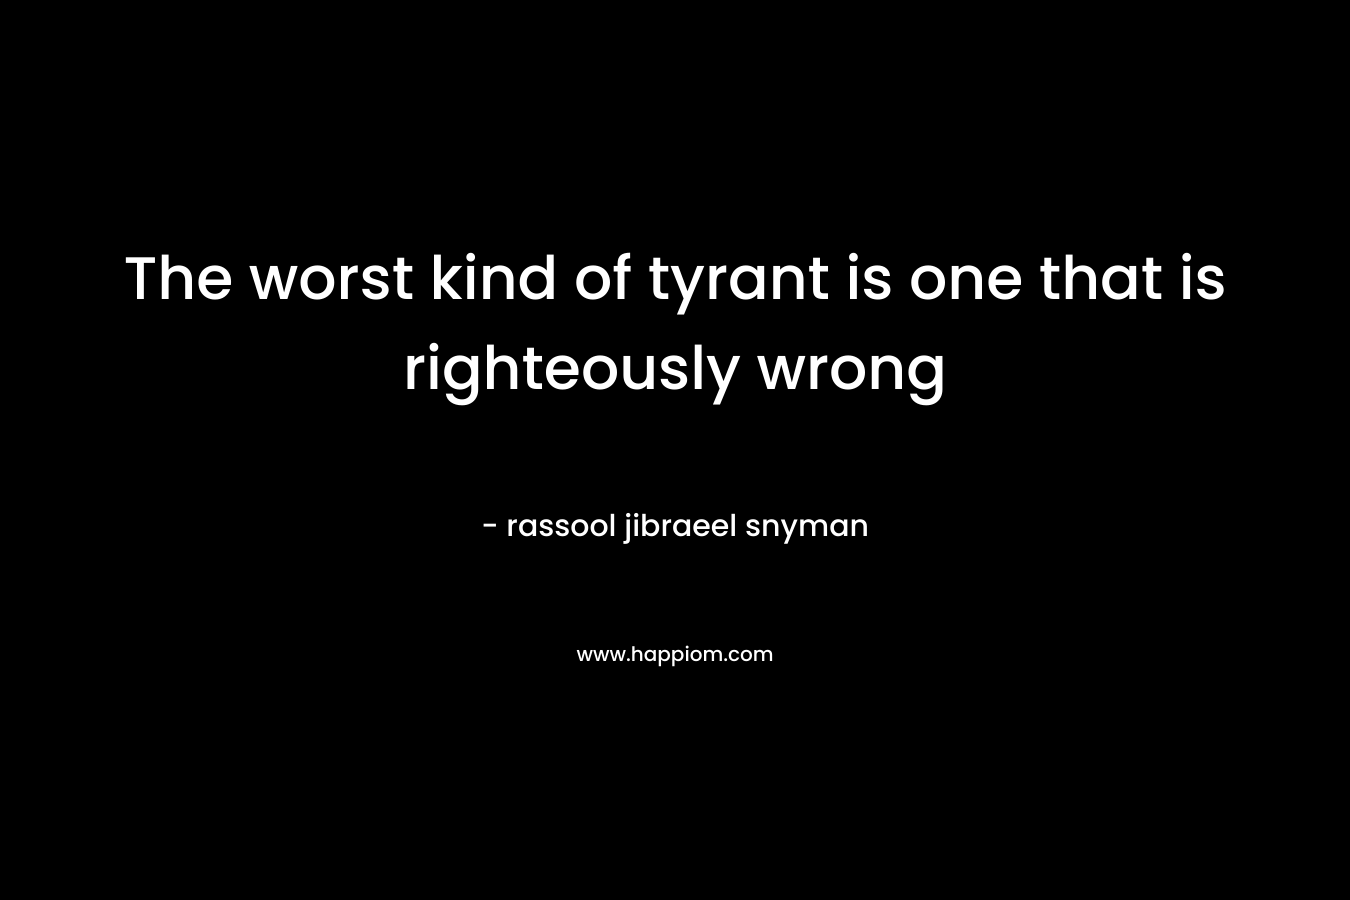 The worst kind of tyrant is one that is righteously wrong